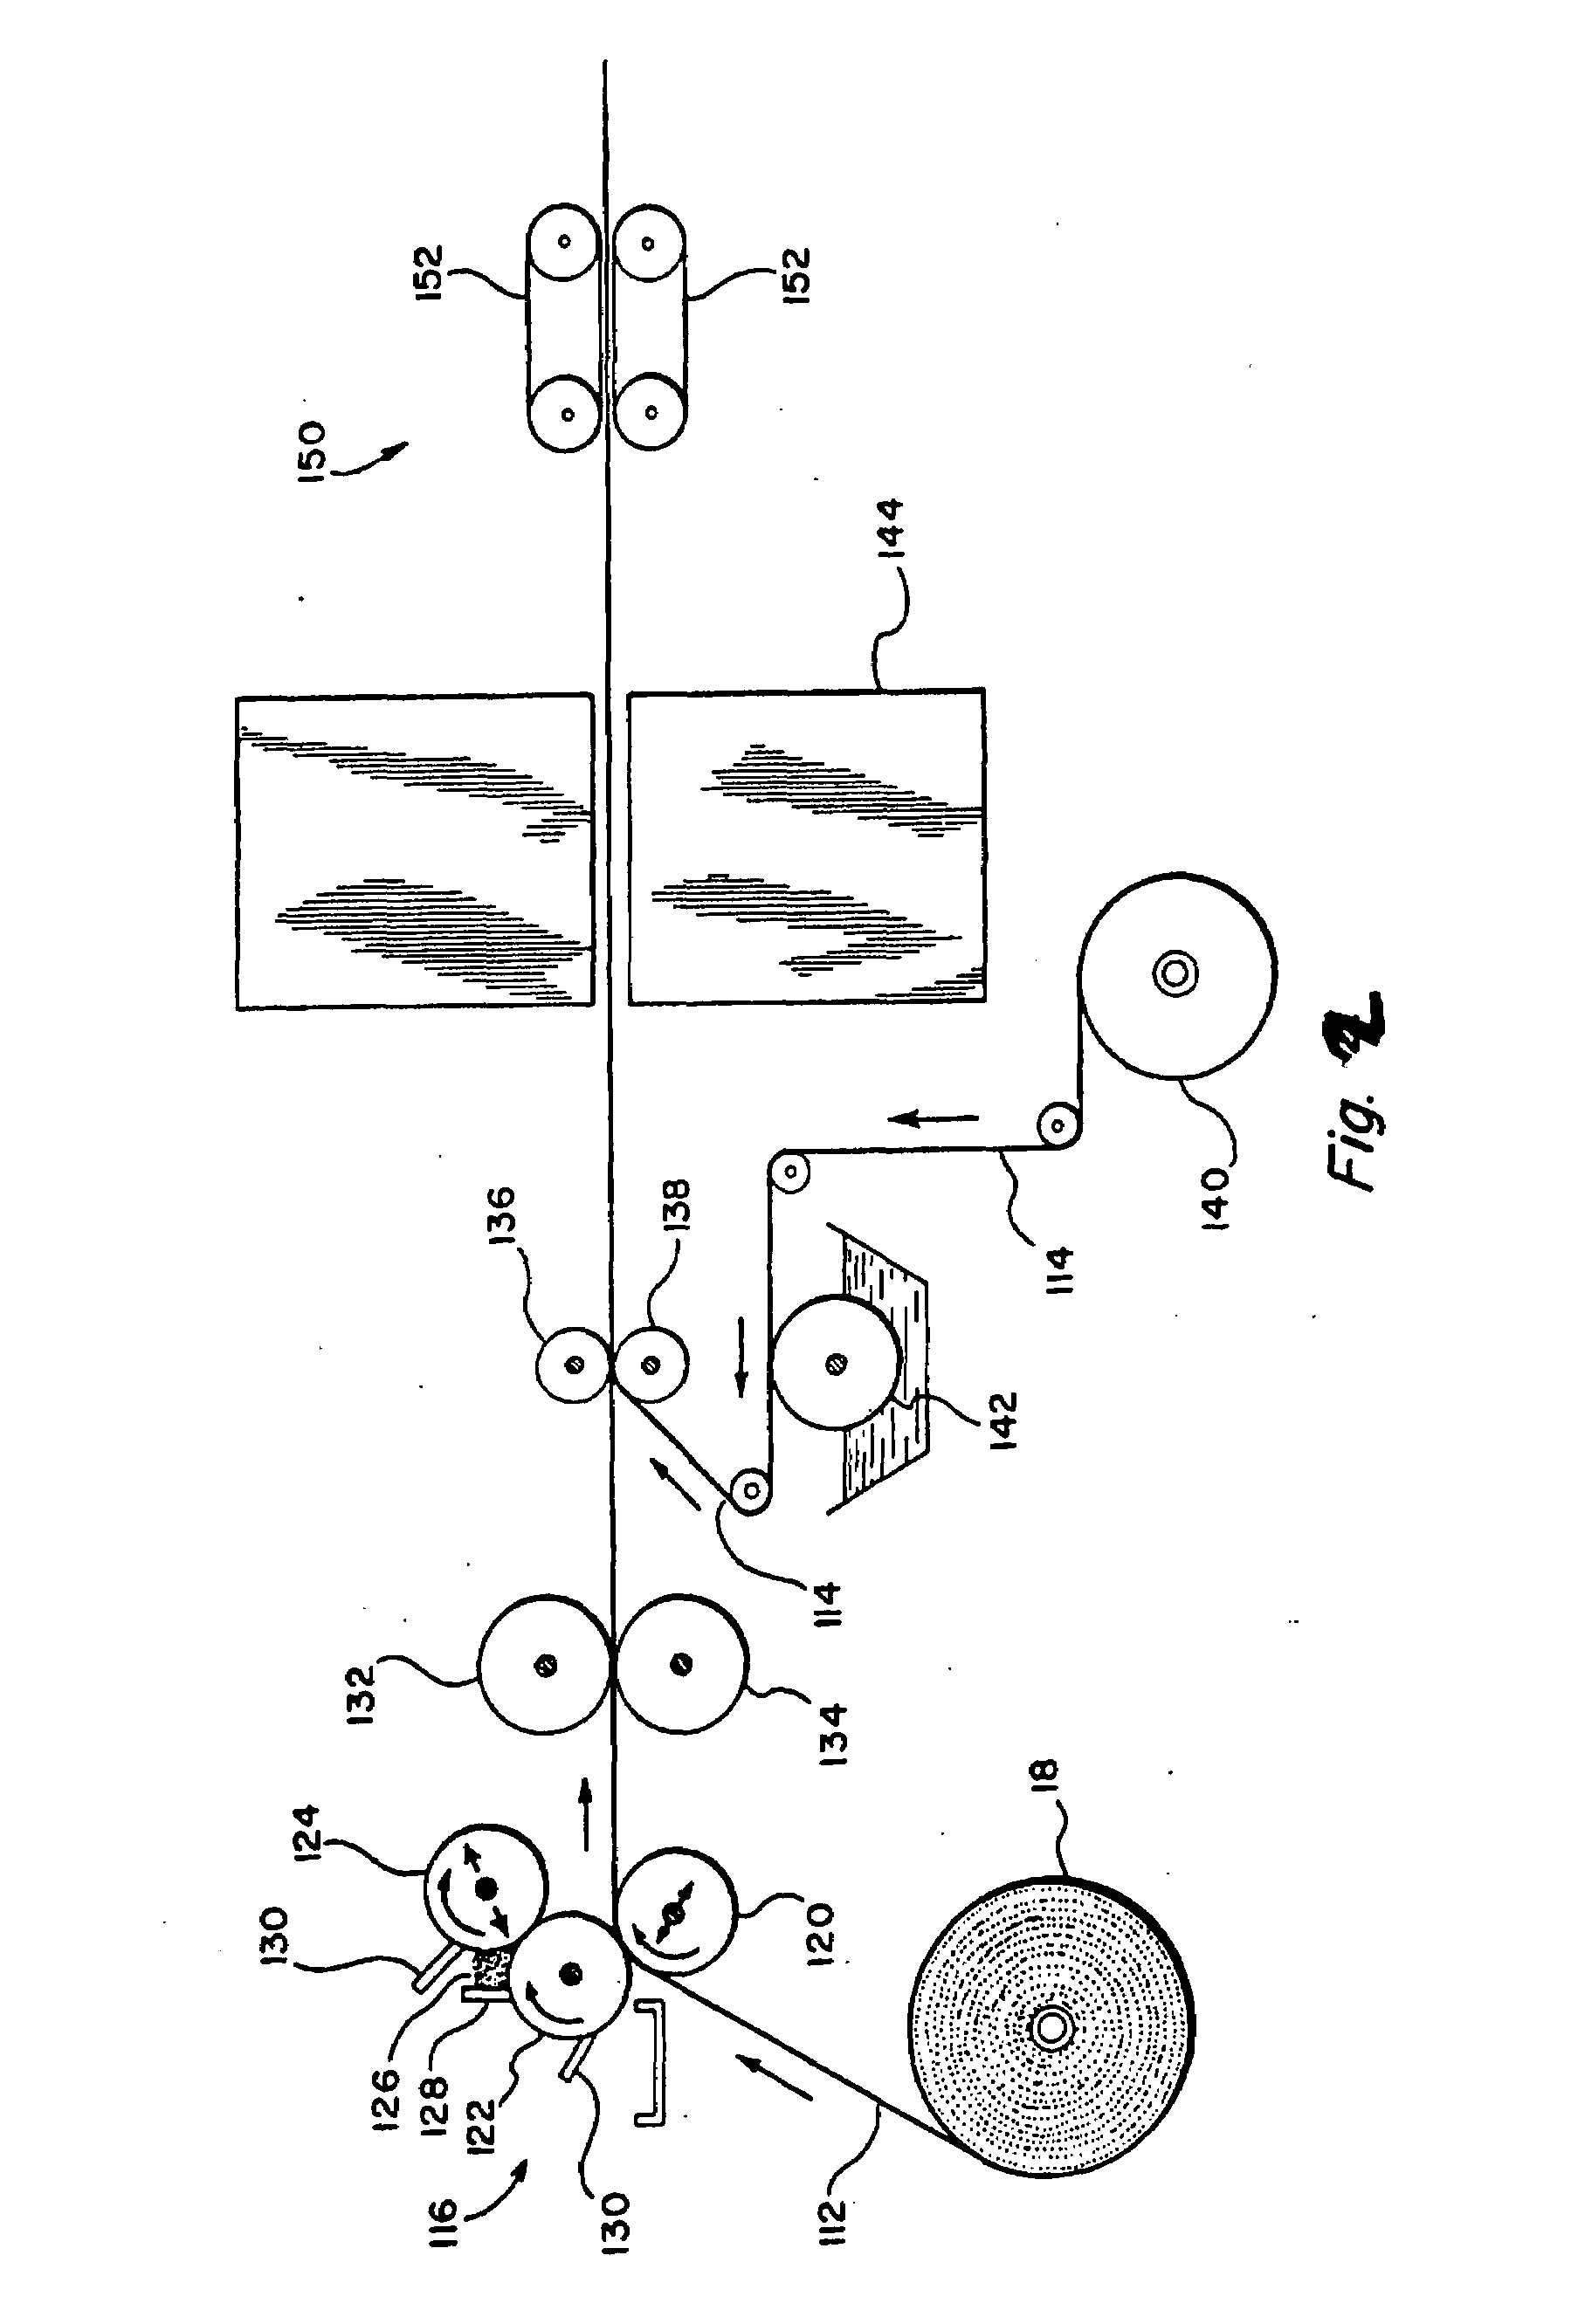 Silicone-impregnated foam product and method for producing same